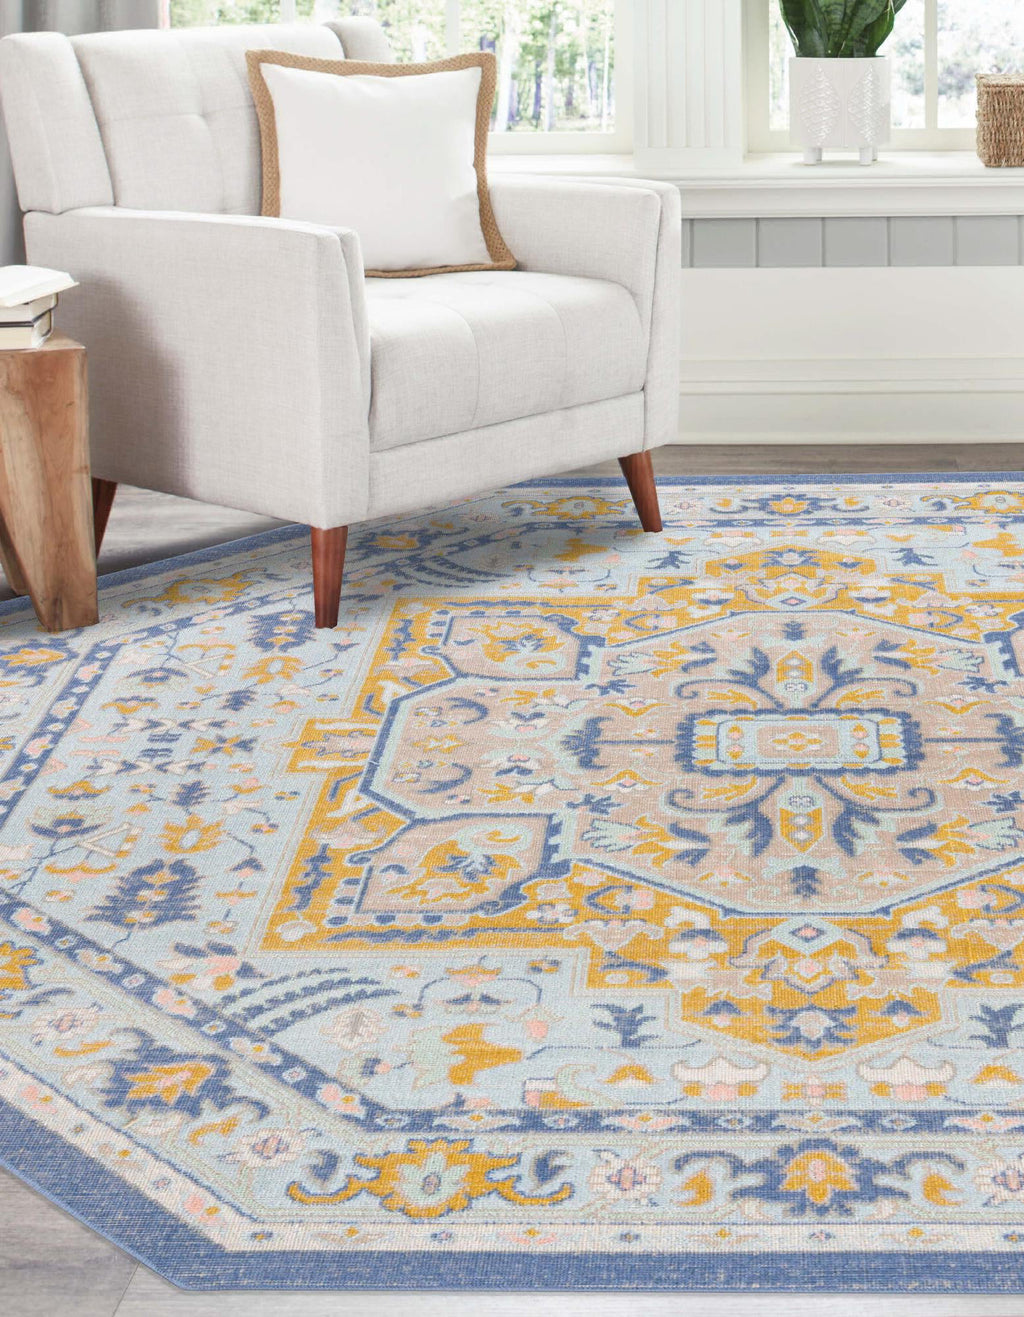 Unique Loom Whitney T-WHIT1 Sky Blue Area Rug Octagon Lifestyle Image Feature